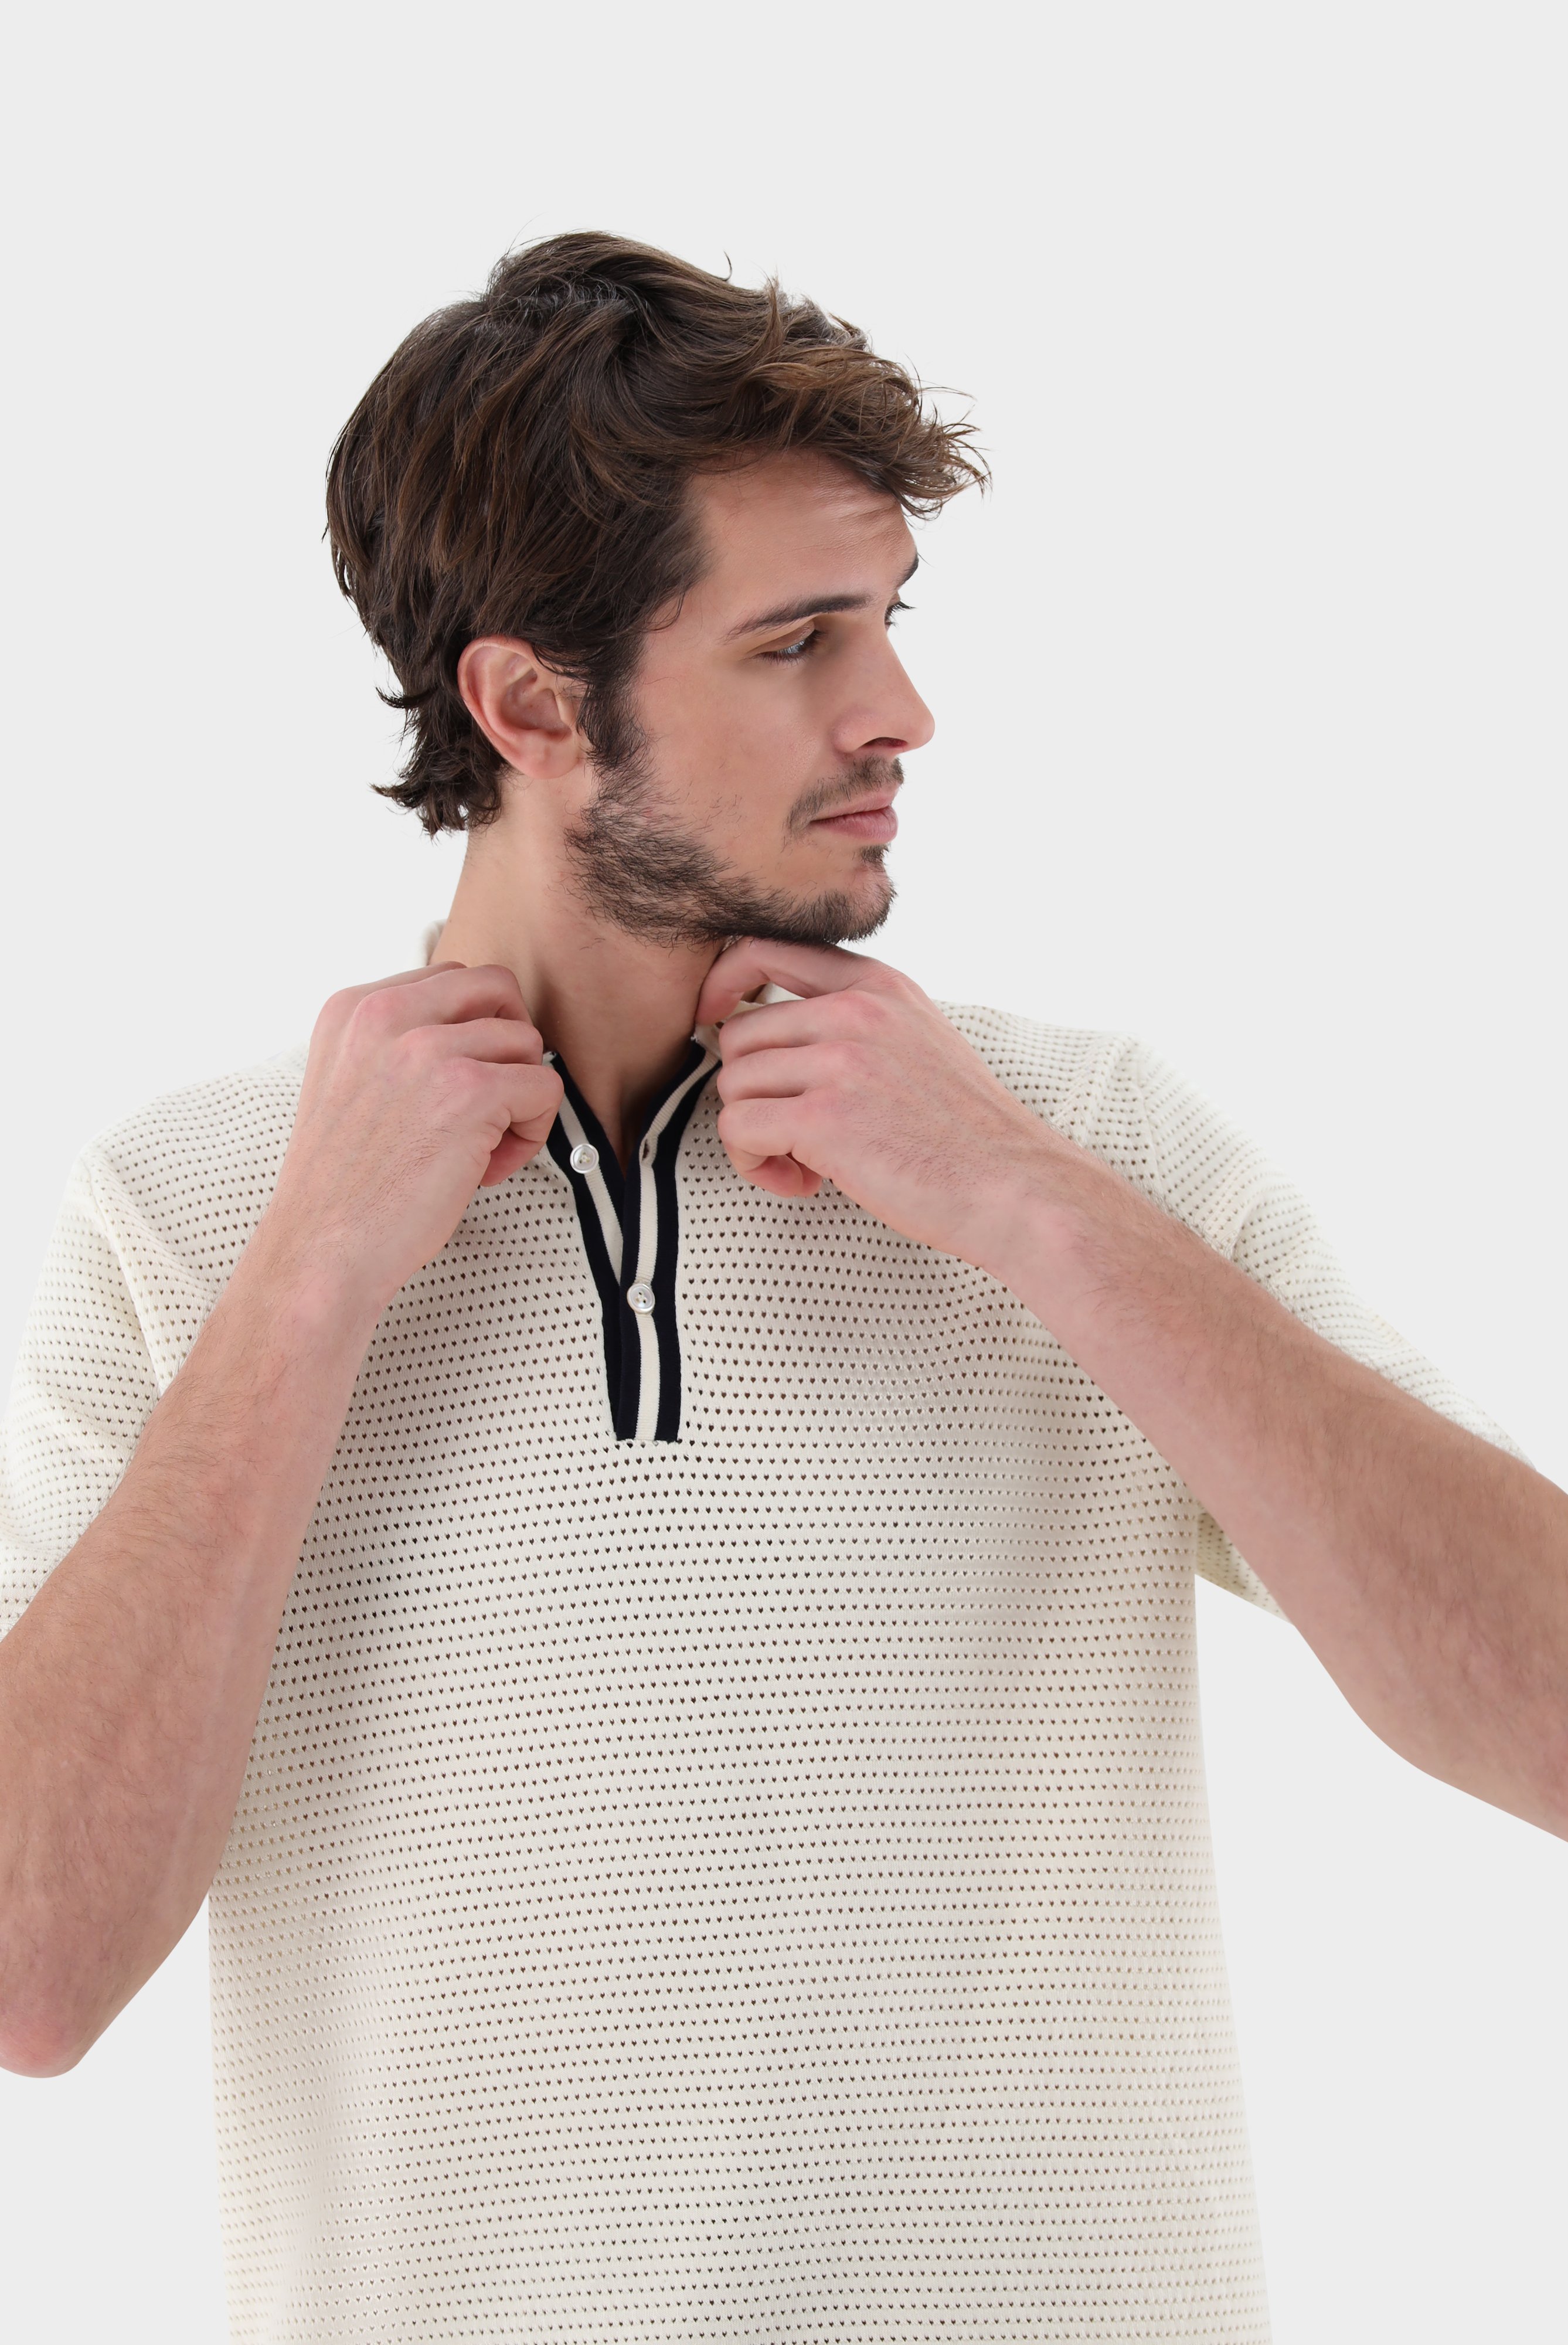 Poloshirts+Knit polo with mesh structure and contrast collar+82.8645.S7.S00267.120.S